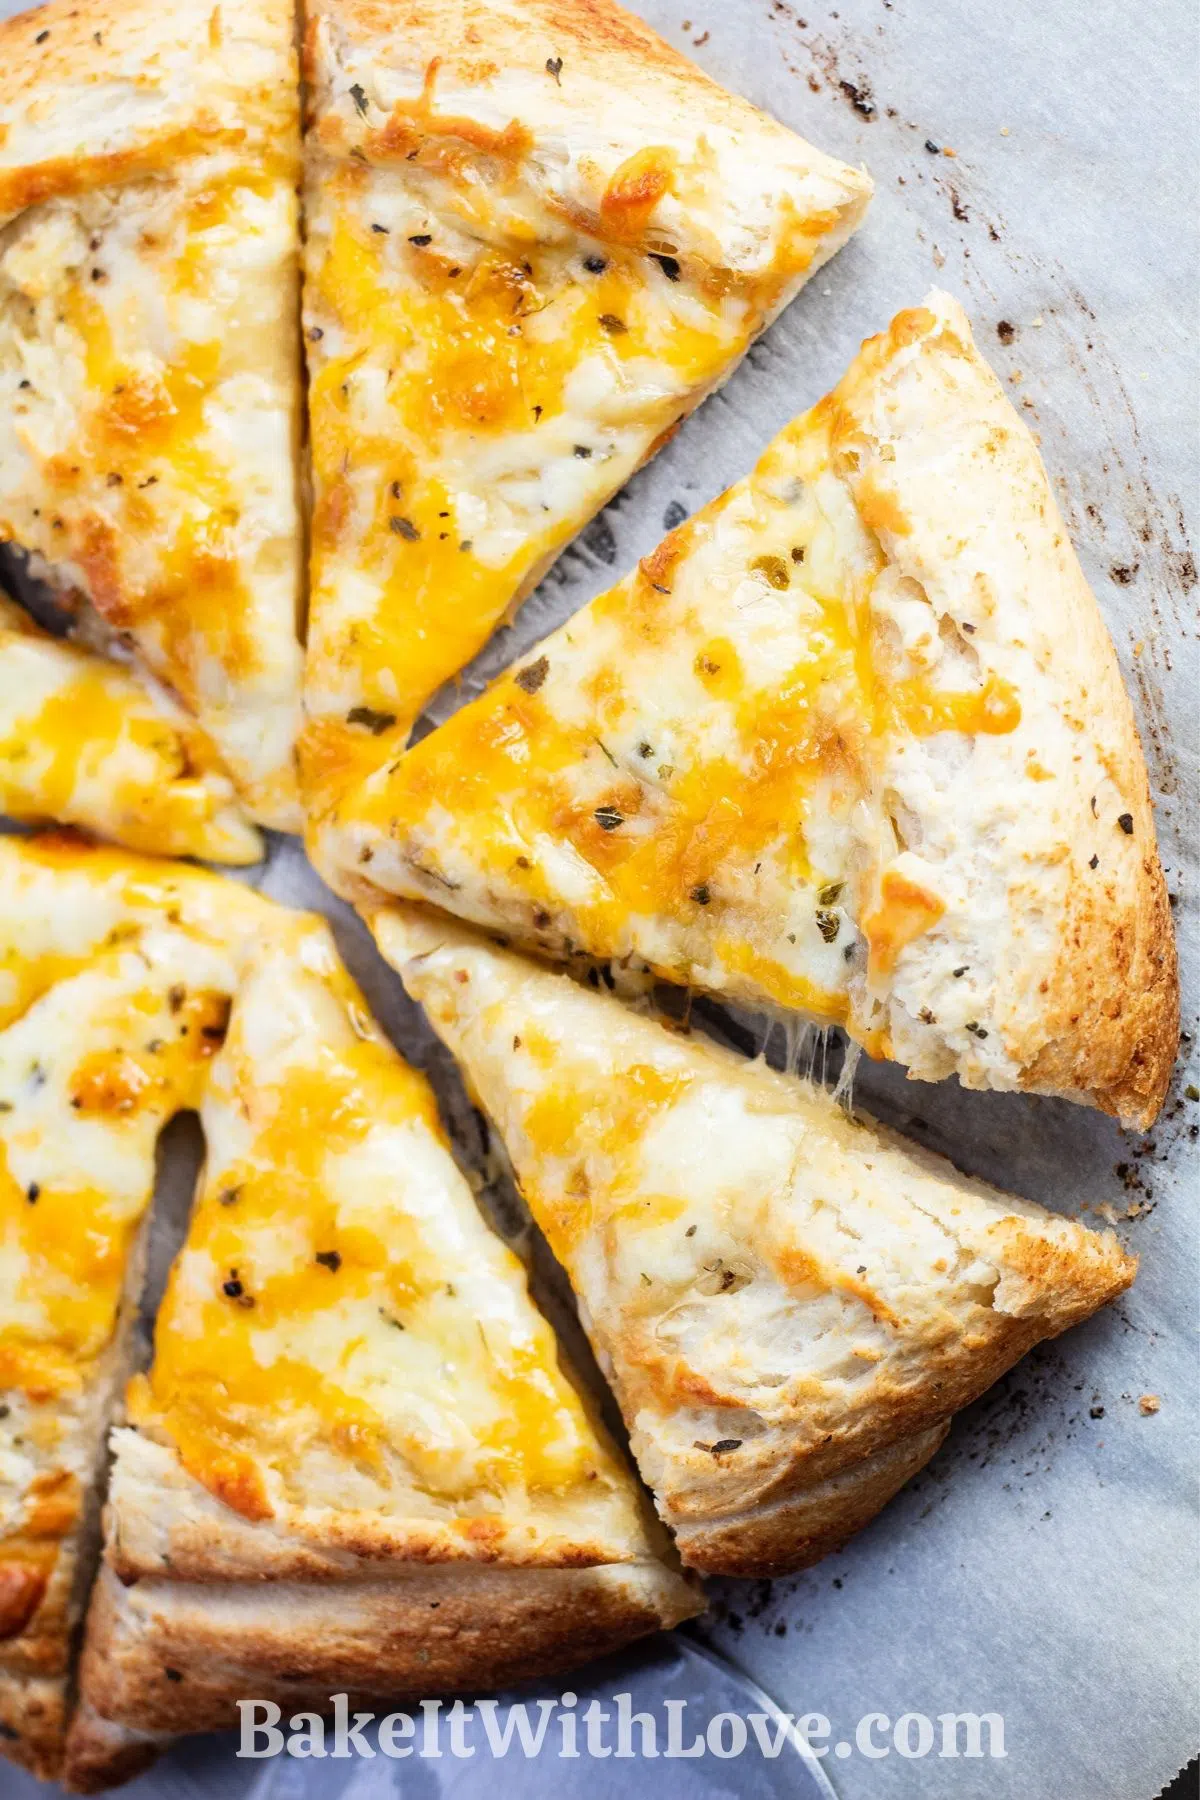 Easy, cheesy garlic pizza sliced and served.